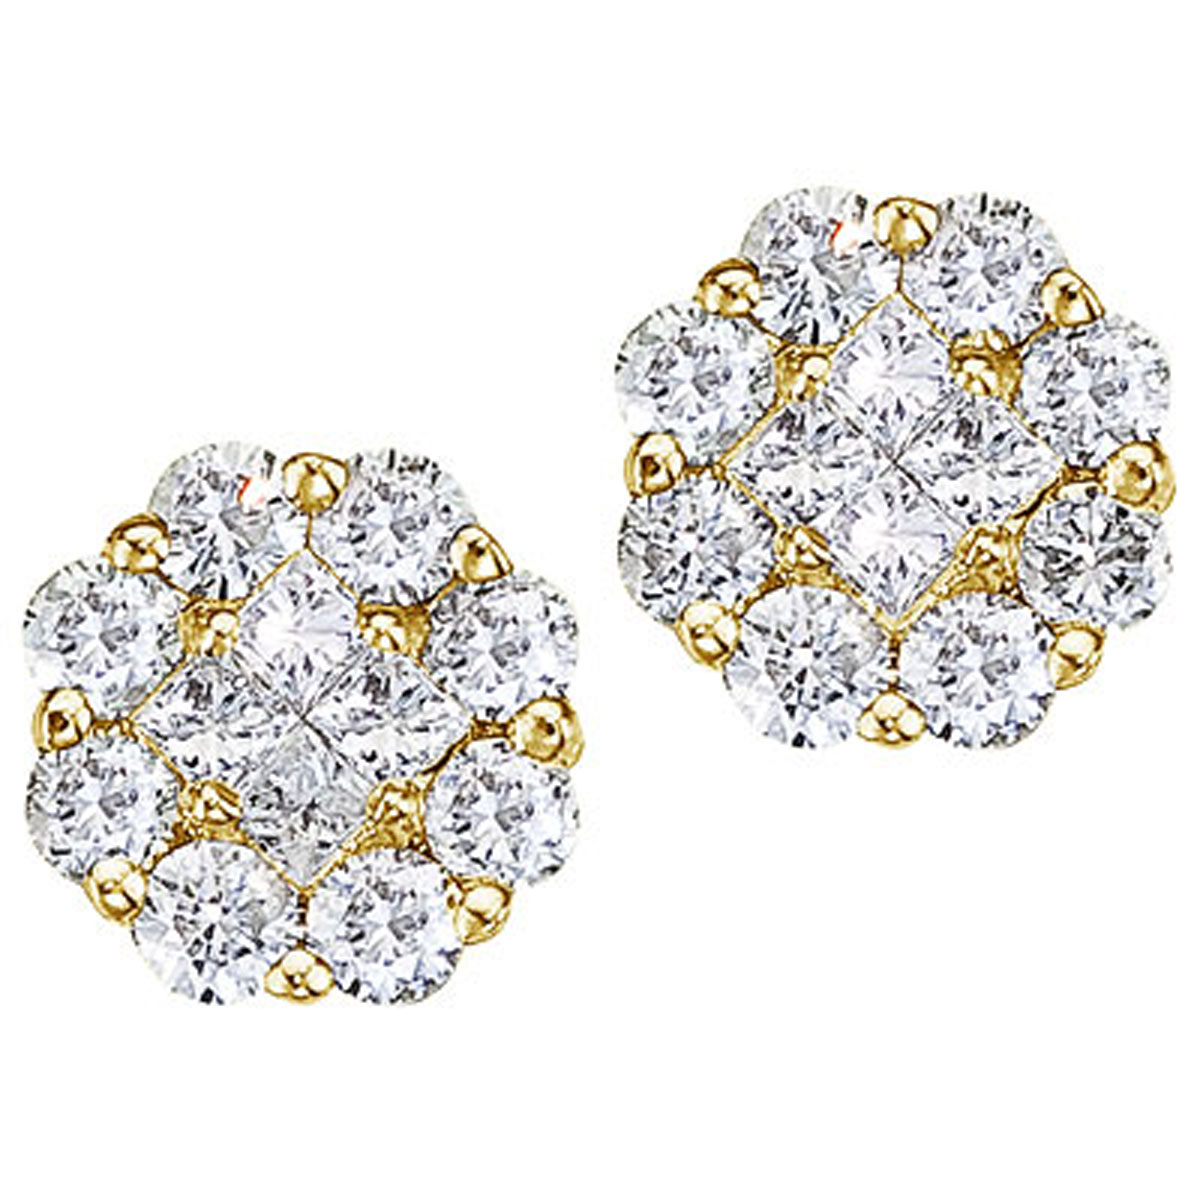 JCX2479: Gorgeous 14k yellow gold earrings with .54 total carats of shimmering genuine diamonds. Clustaires give all the sparkling elegence of a solitaire at a fraction of the price.